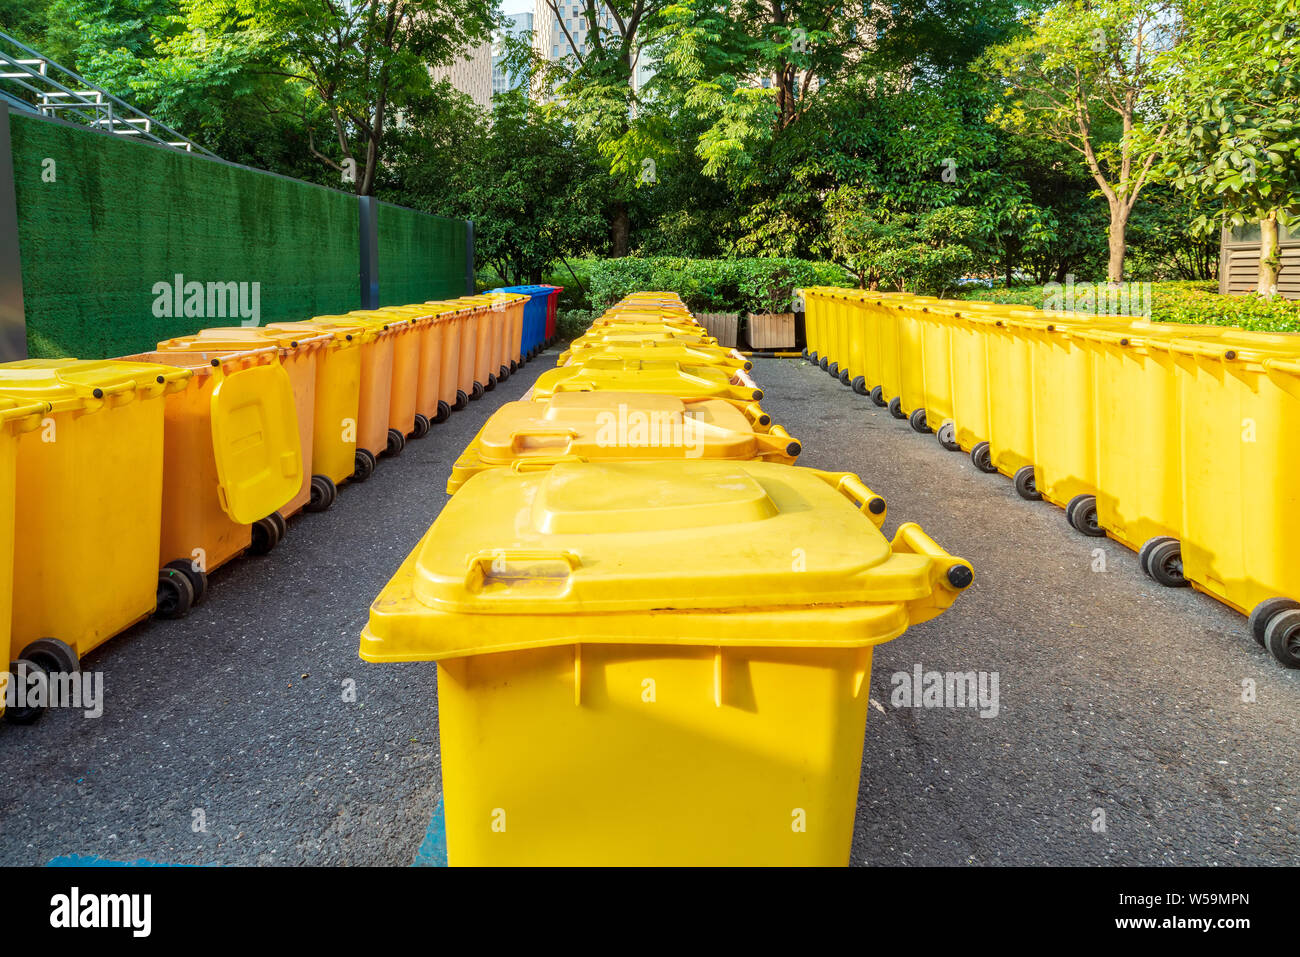 https://c8.alamy.com/comp/W59MPN/overfilled-trash-of-large-wheelie-bins-for-rubbish-recycling-and-garden-waste-W59MPN.jpg